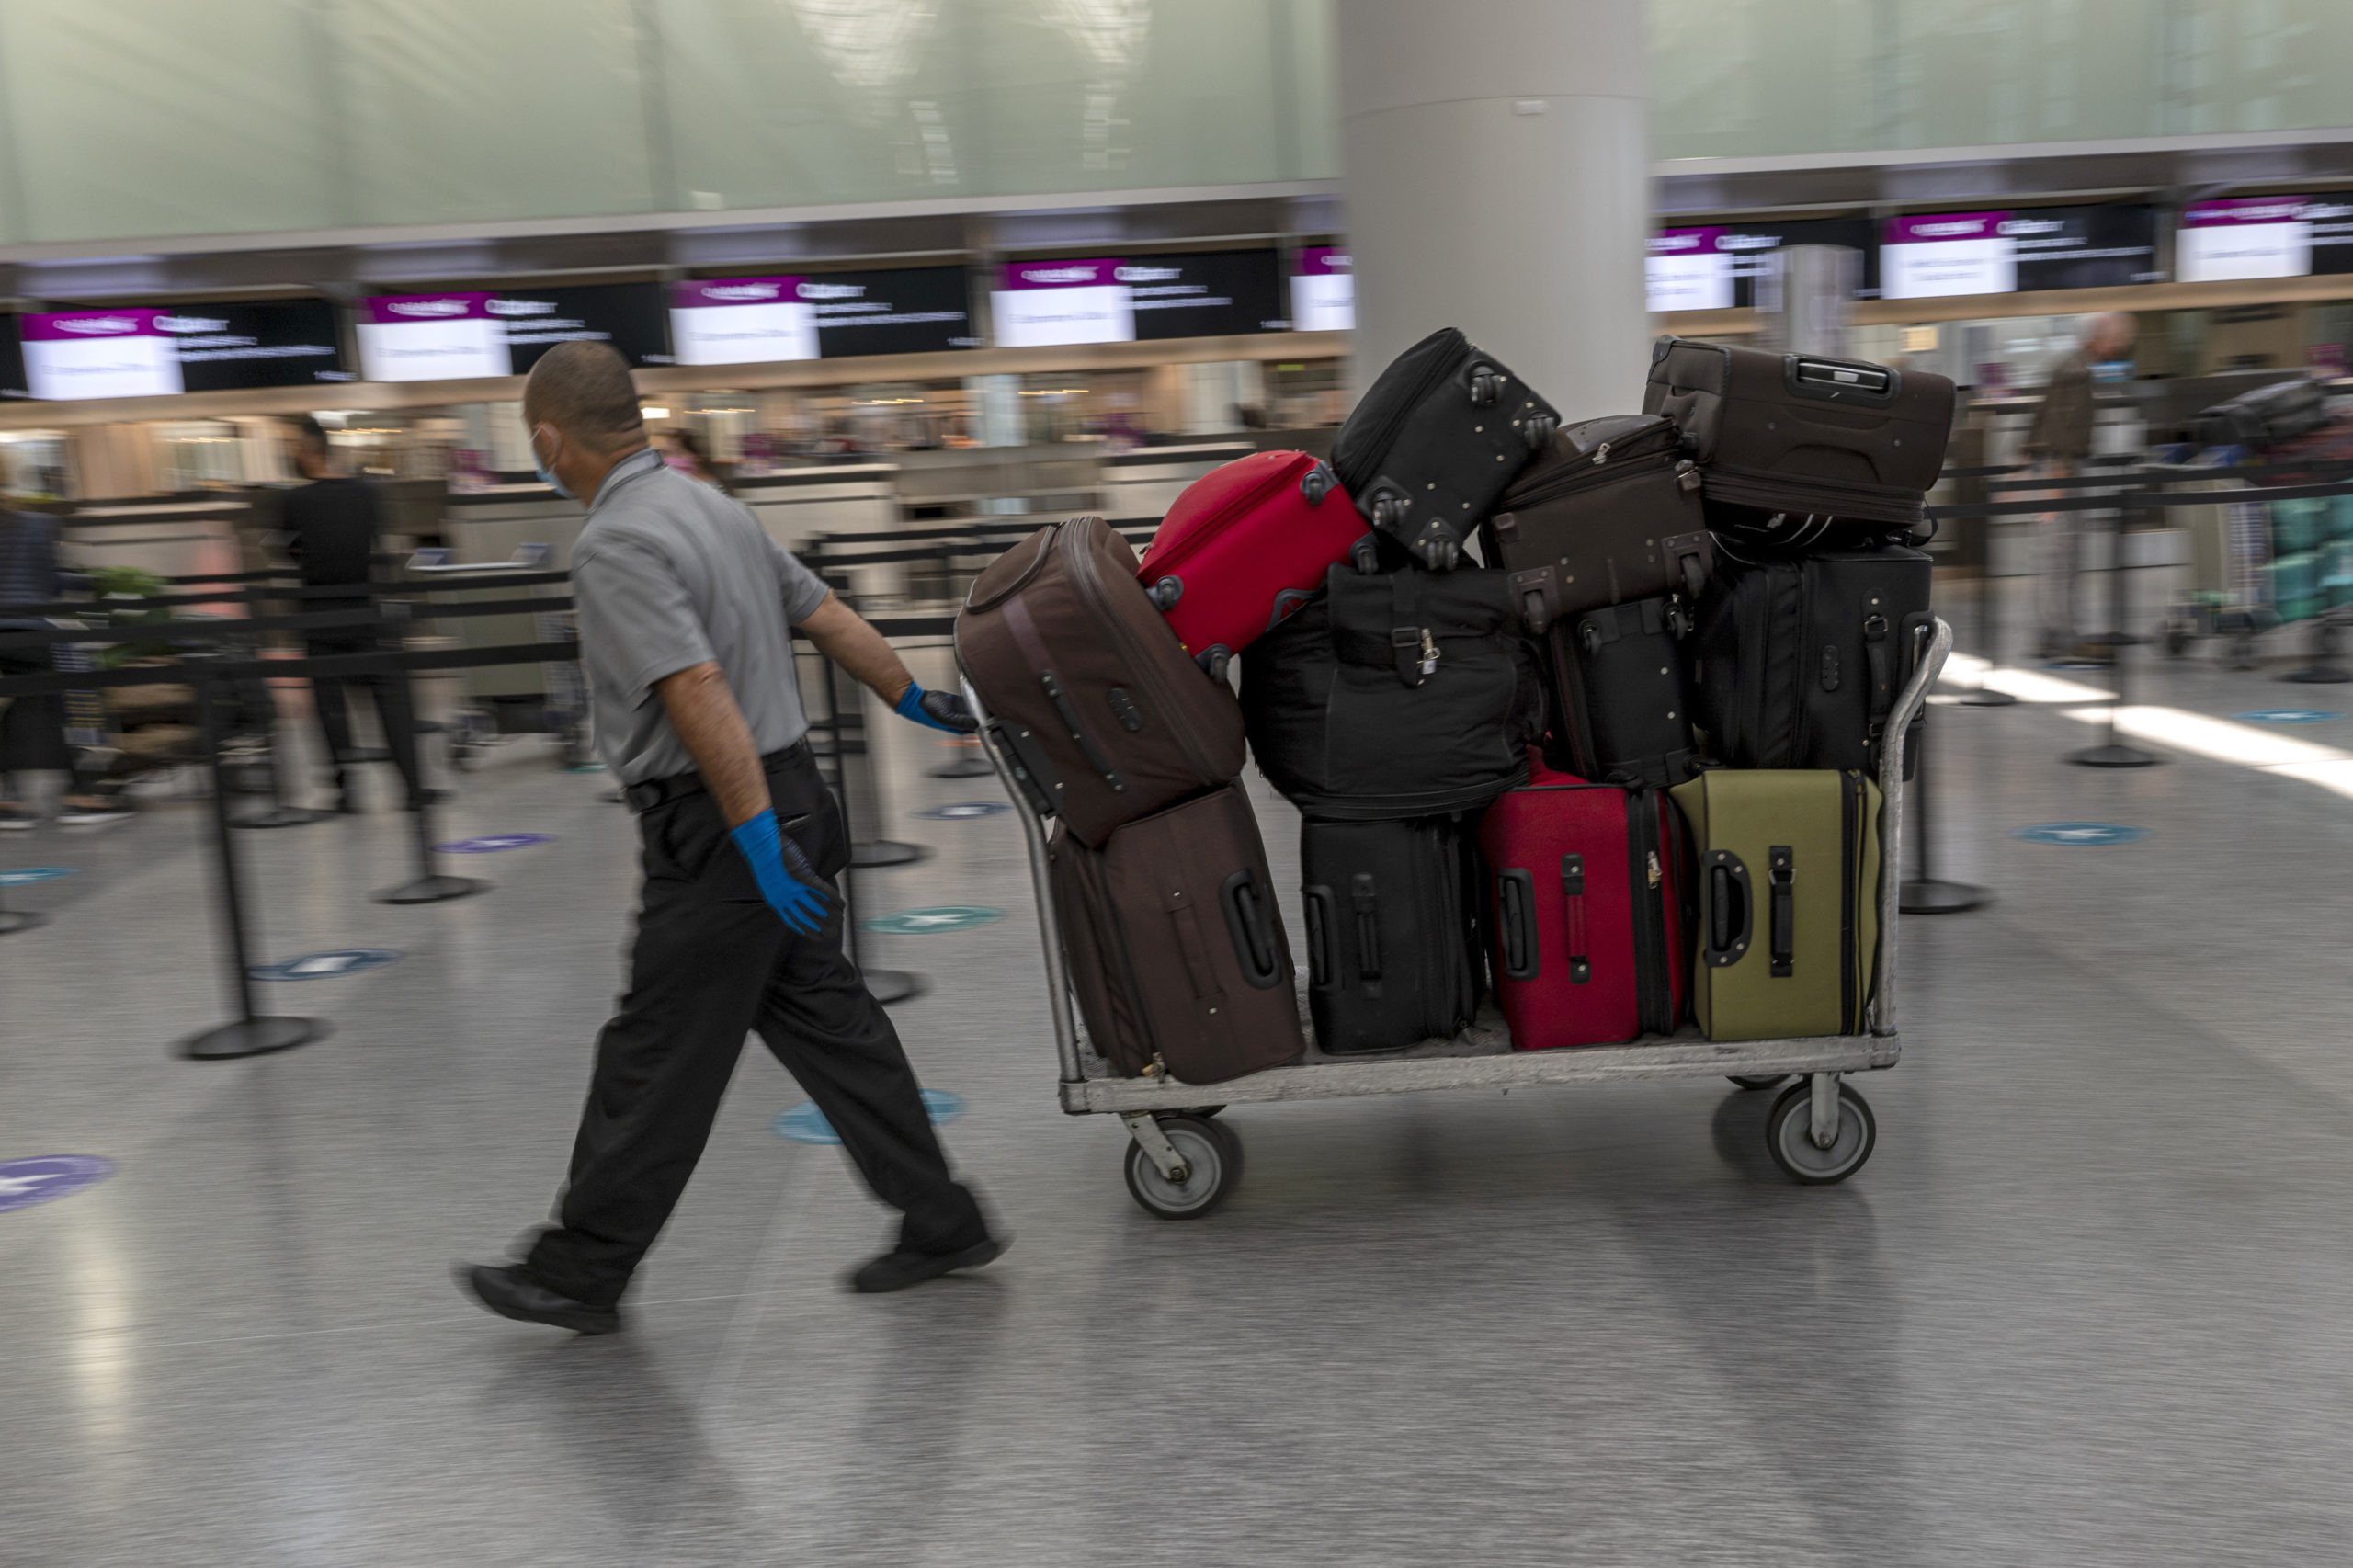 Australia's largest airline asks senior executives to help with lost luggages